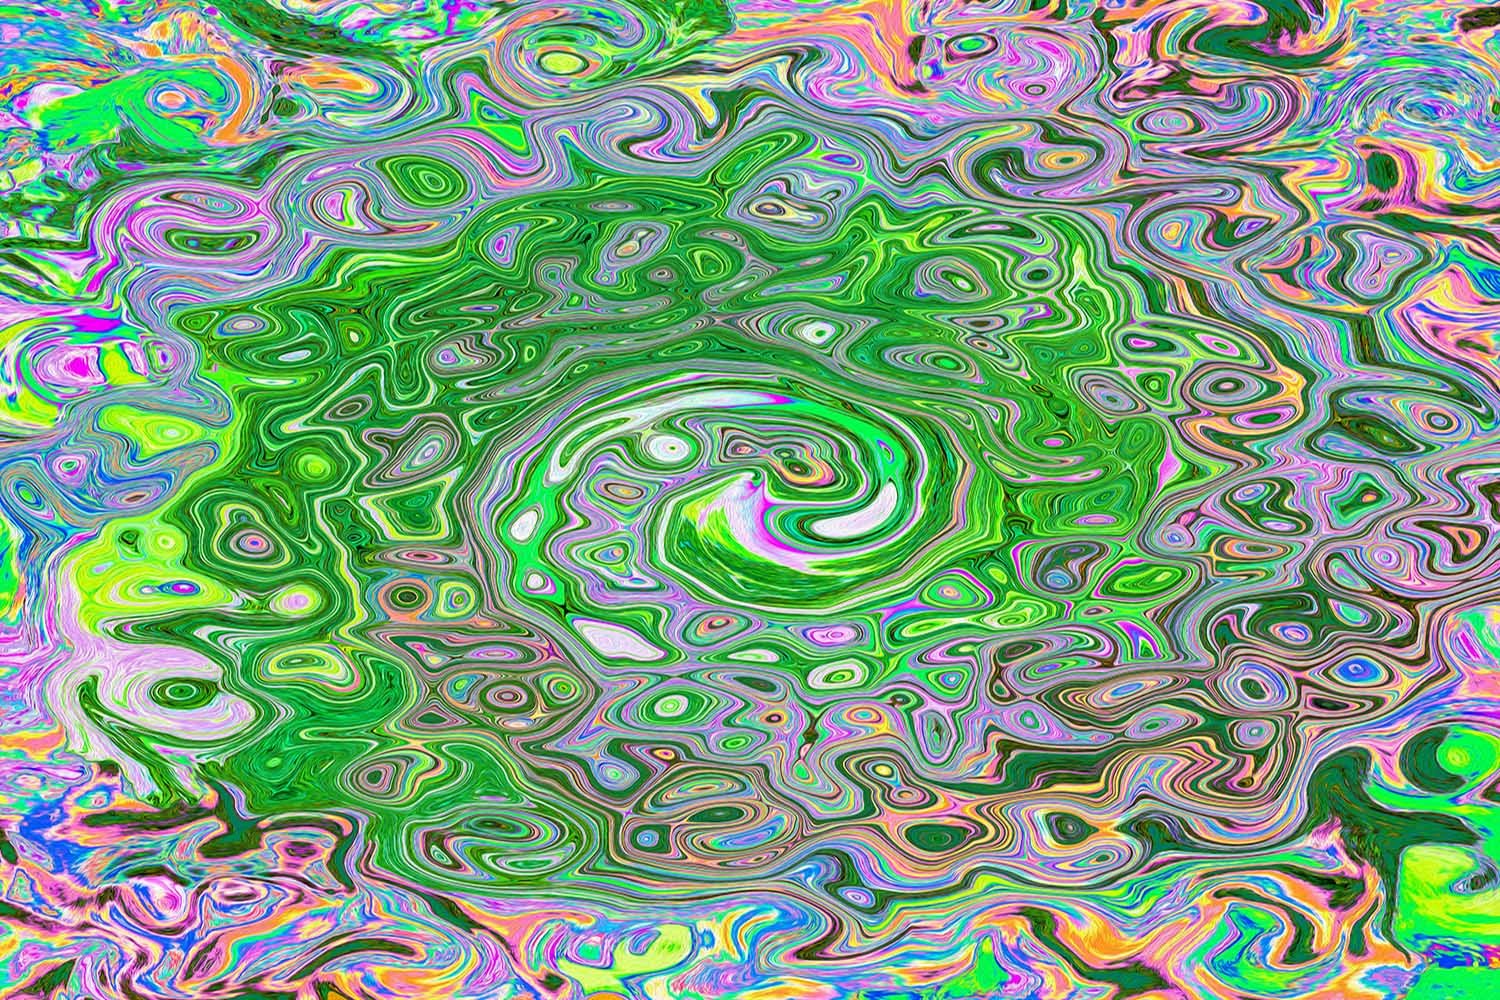 Trippy Lime Green and Pink Abstract Retro Swirl